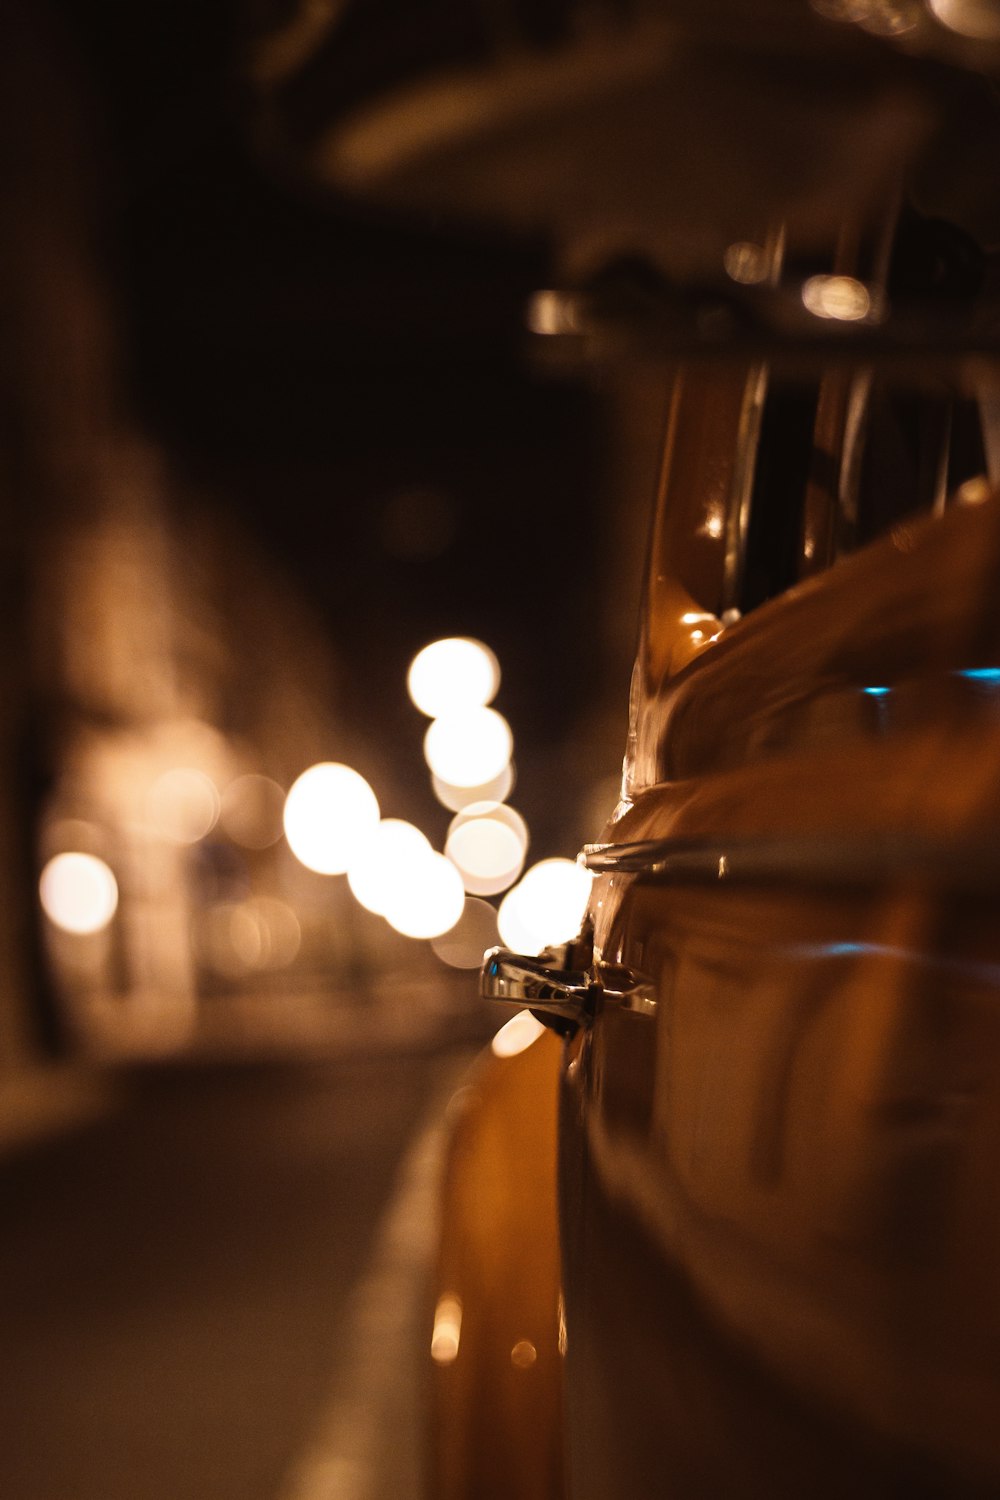 shallow focus photography of yellow car during night time